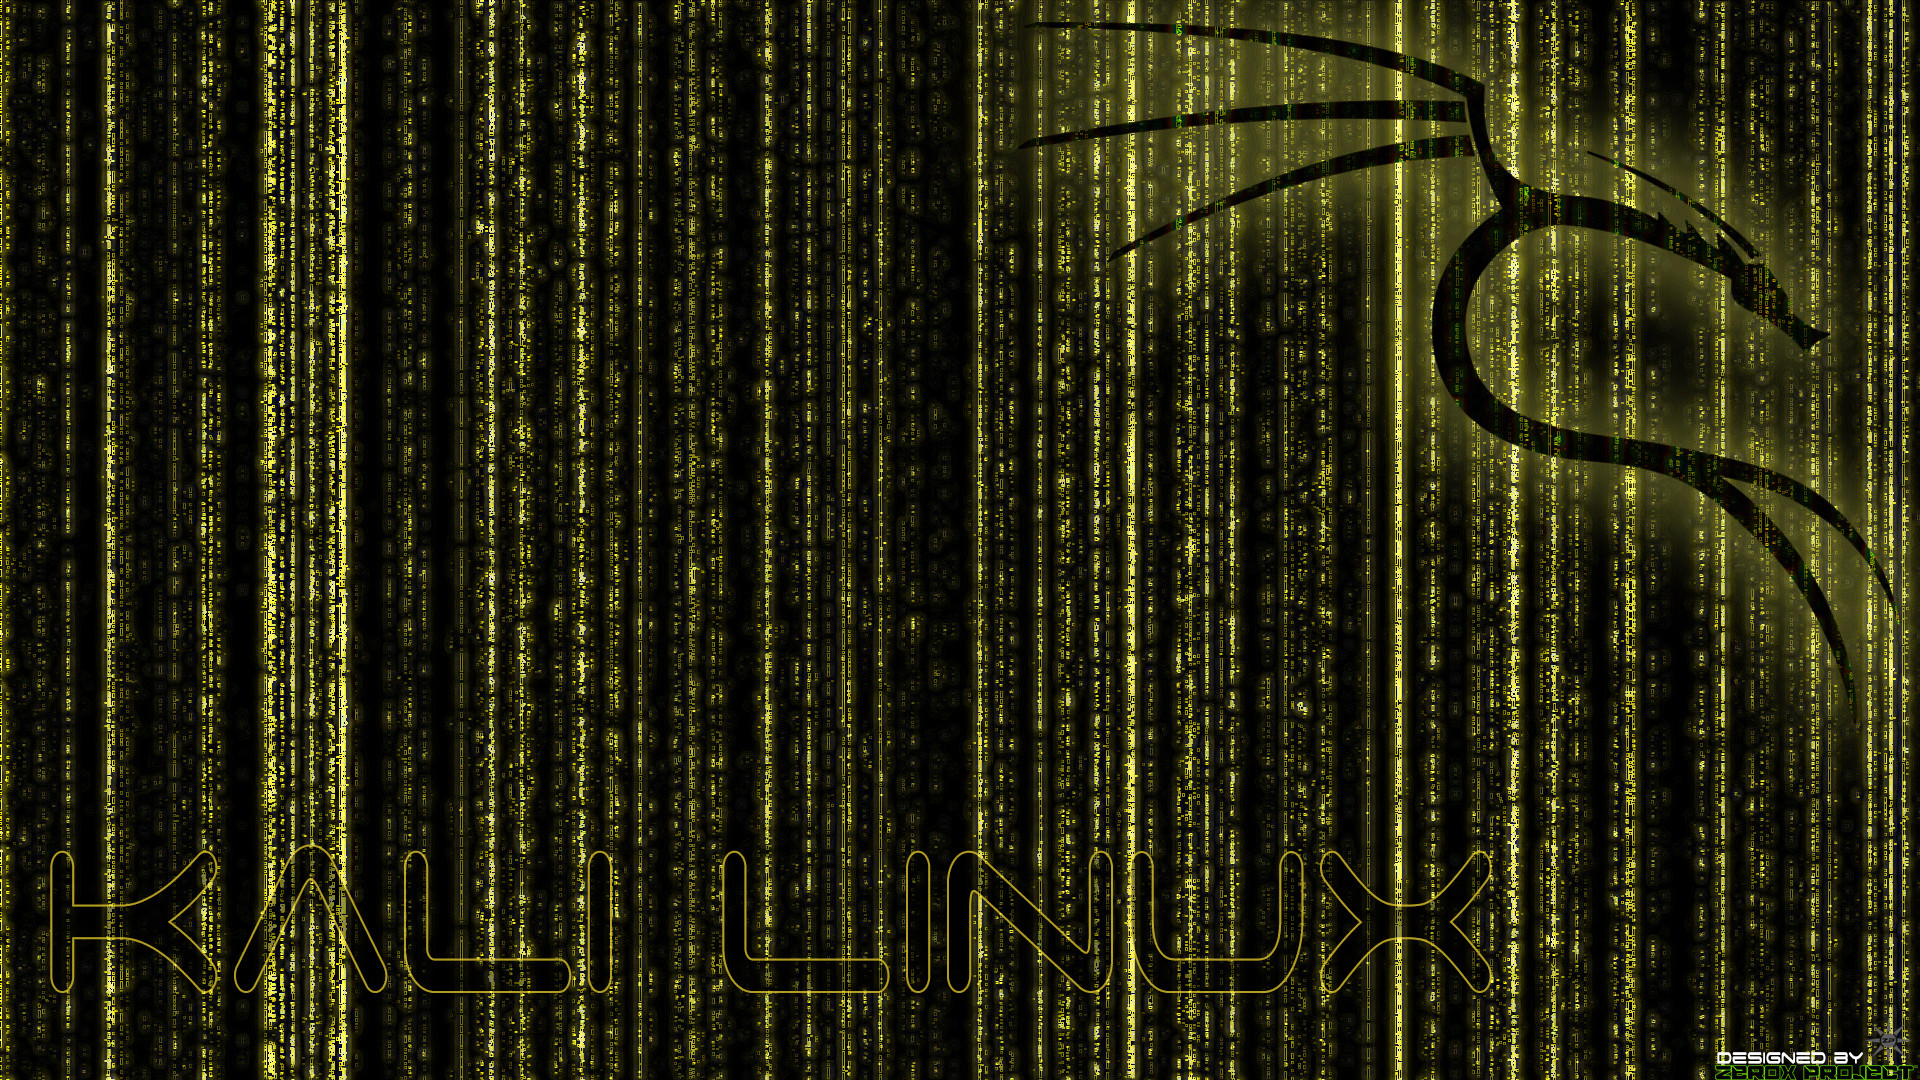 1920x1080 ... Kali Linux BackTrack Wallpaper Yellow v.1 by ZeroxProject